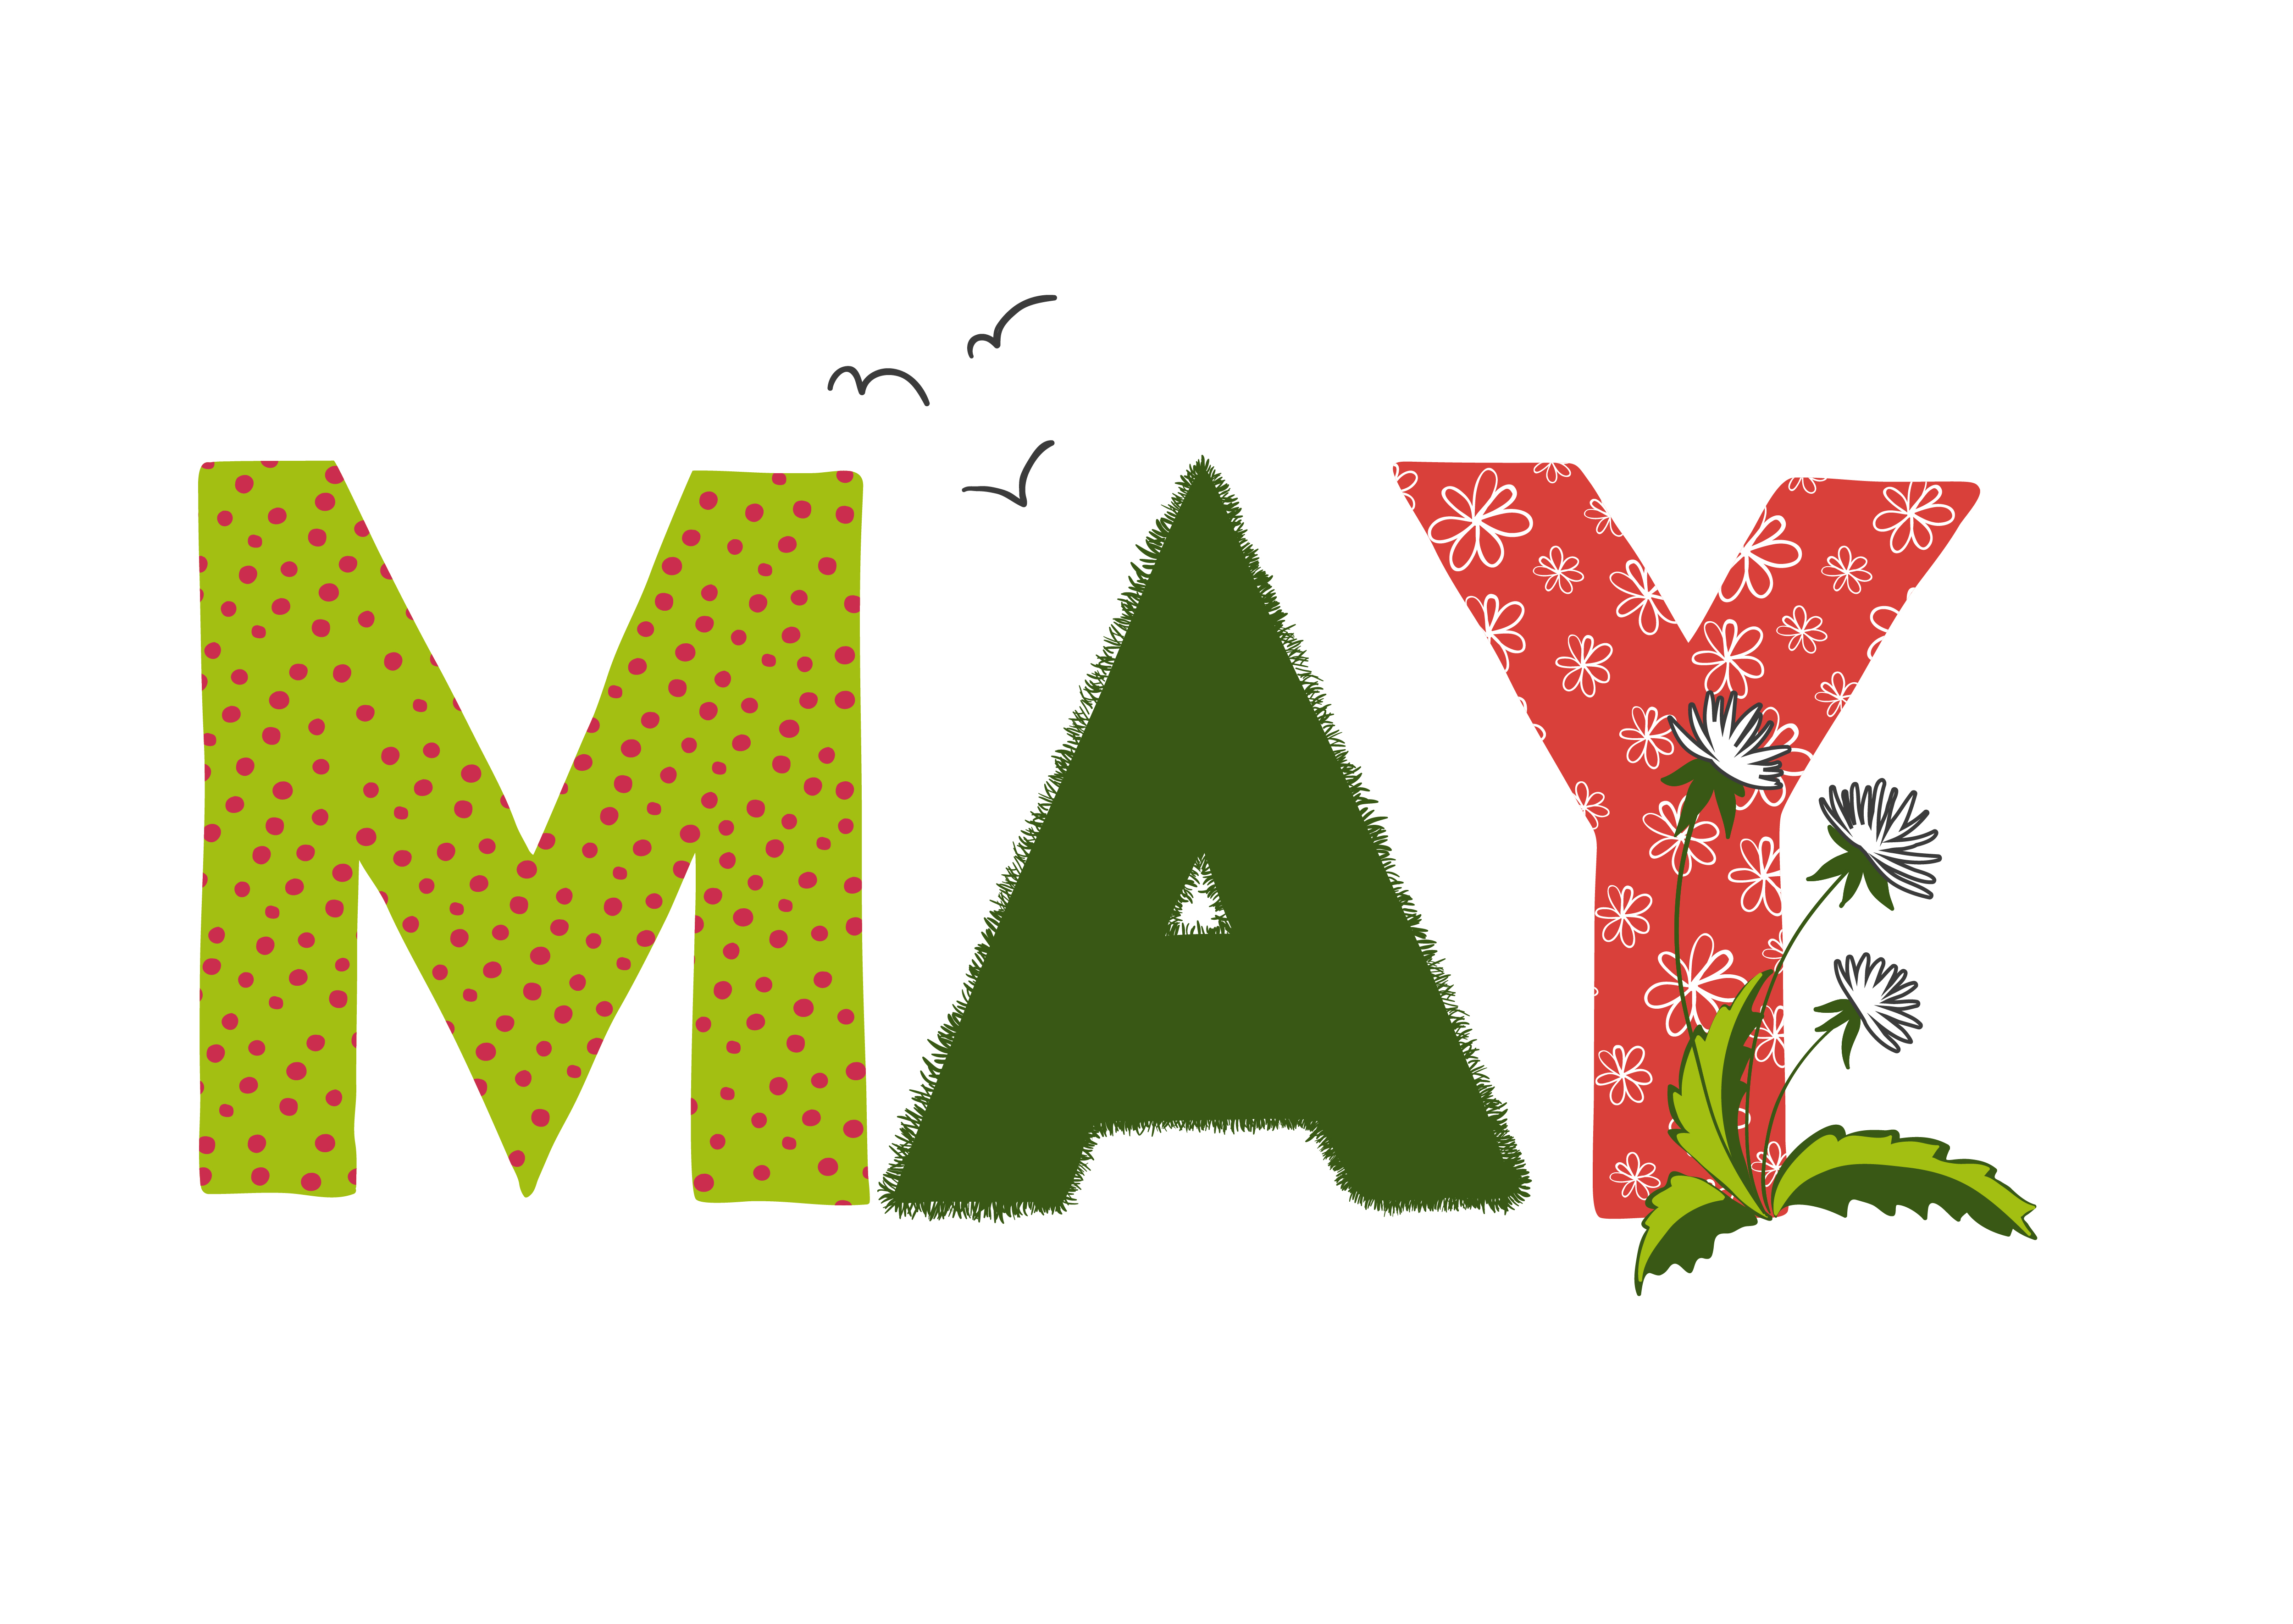 content marketing ideas - an illustration of the may season